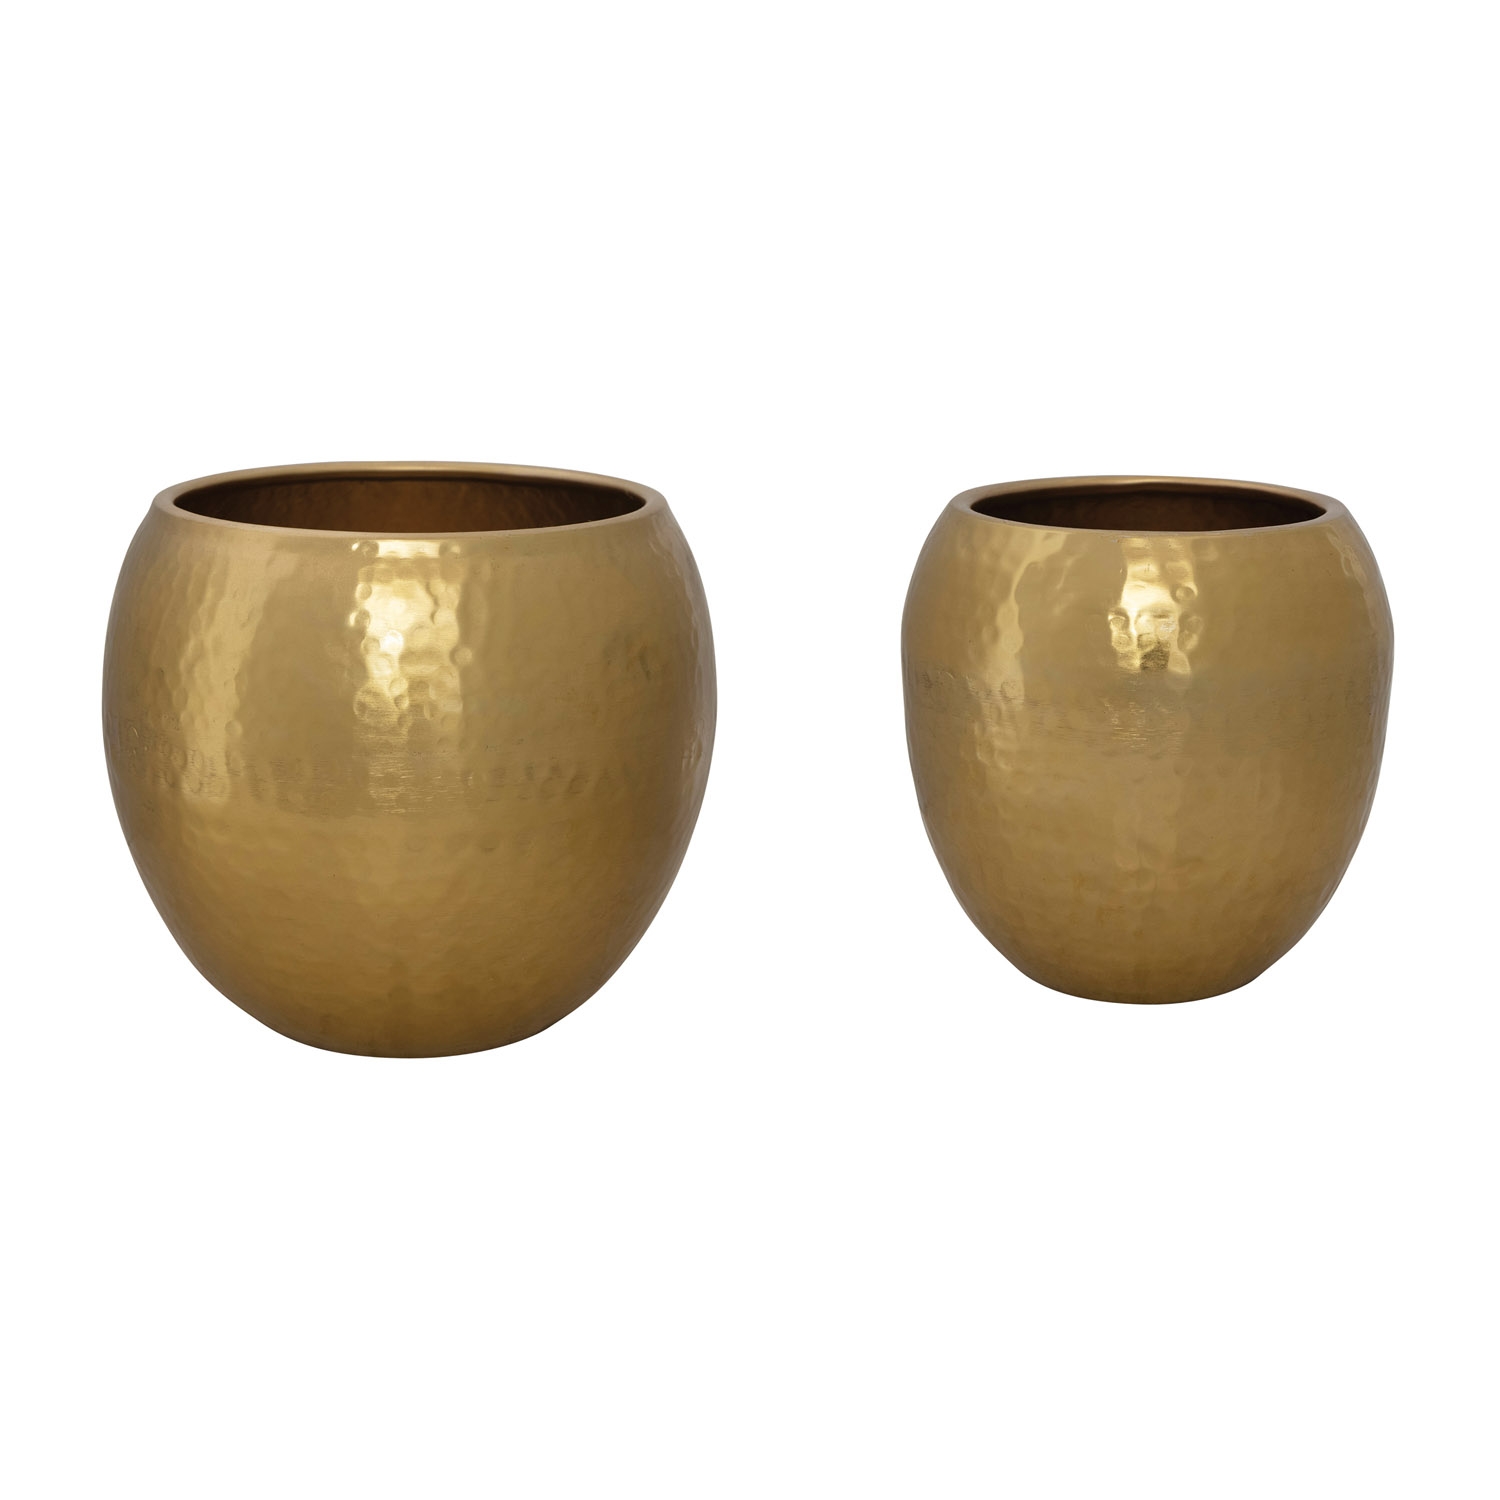 Hammered Metal Planters, Brass Finish, Set of 2 - Image 0